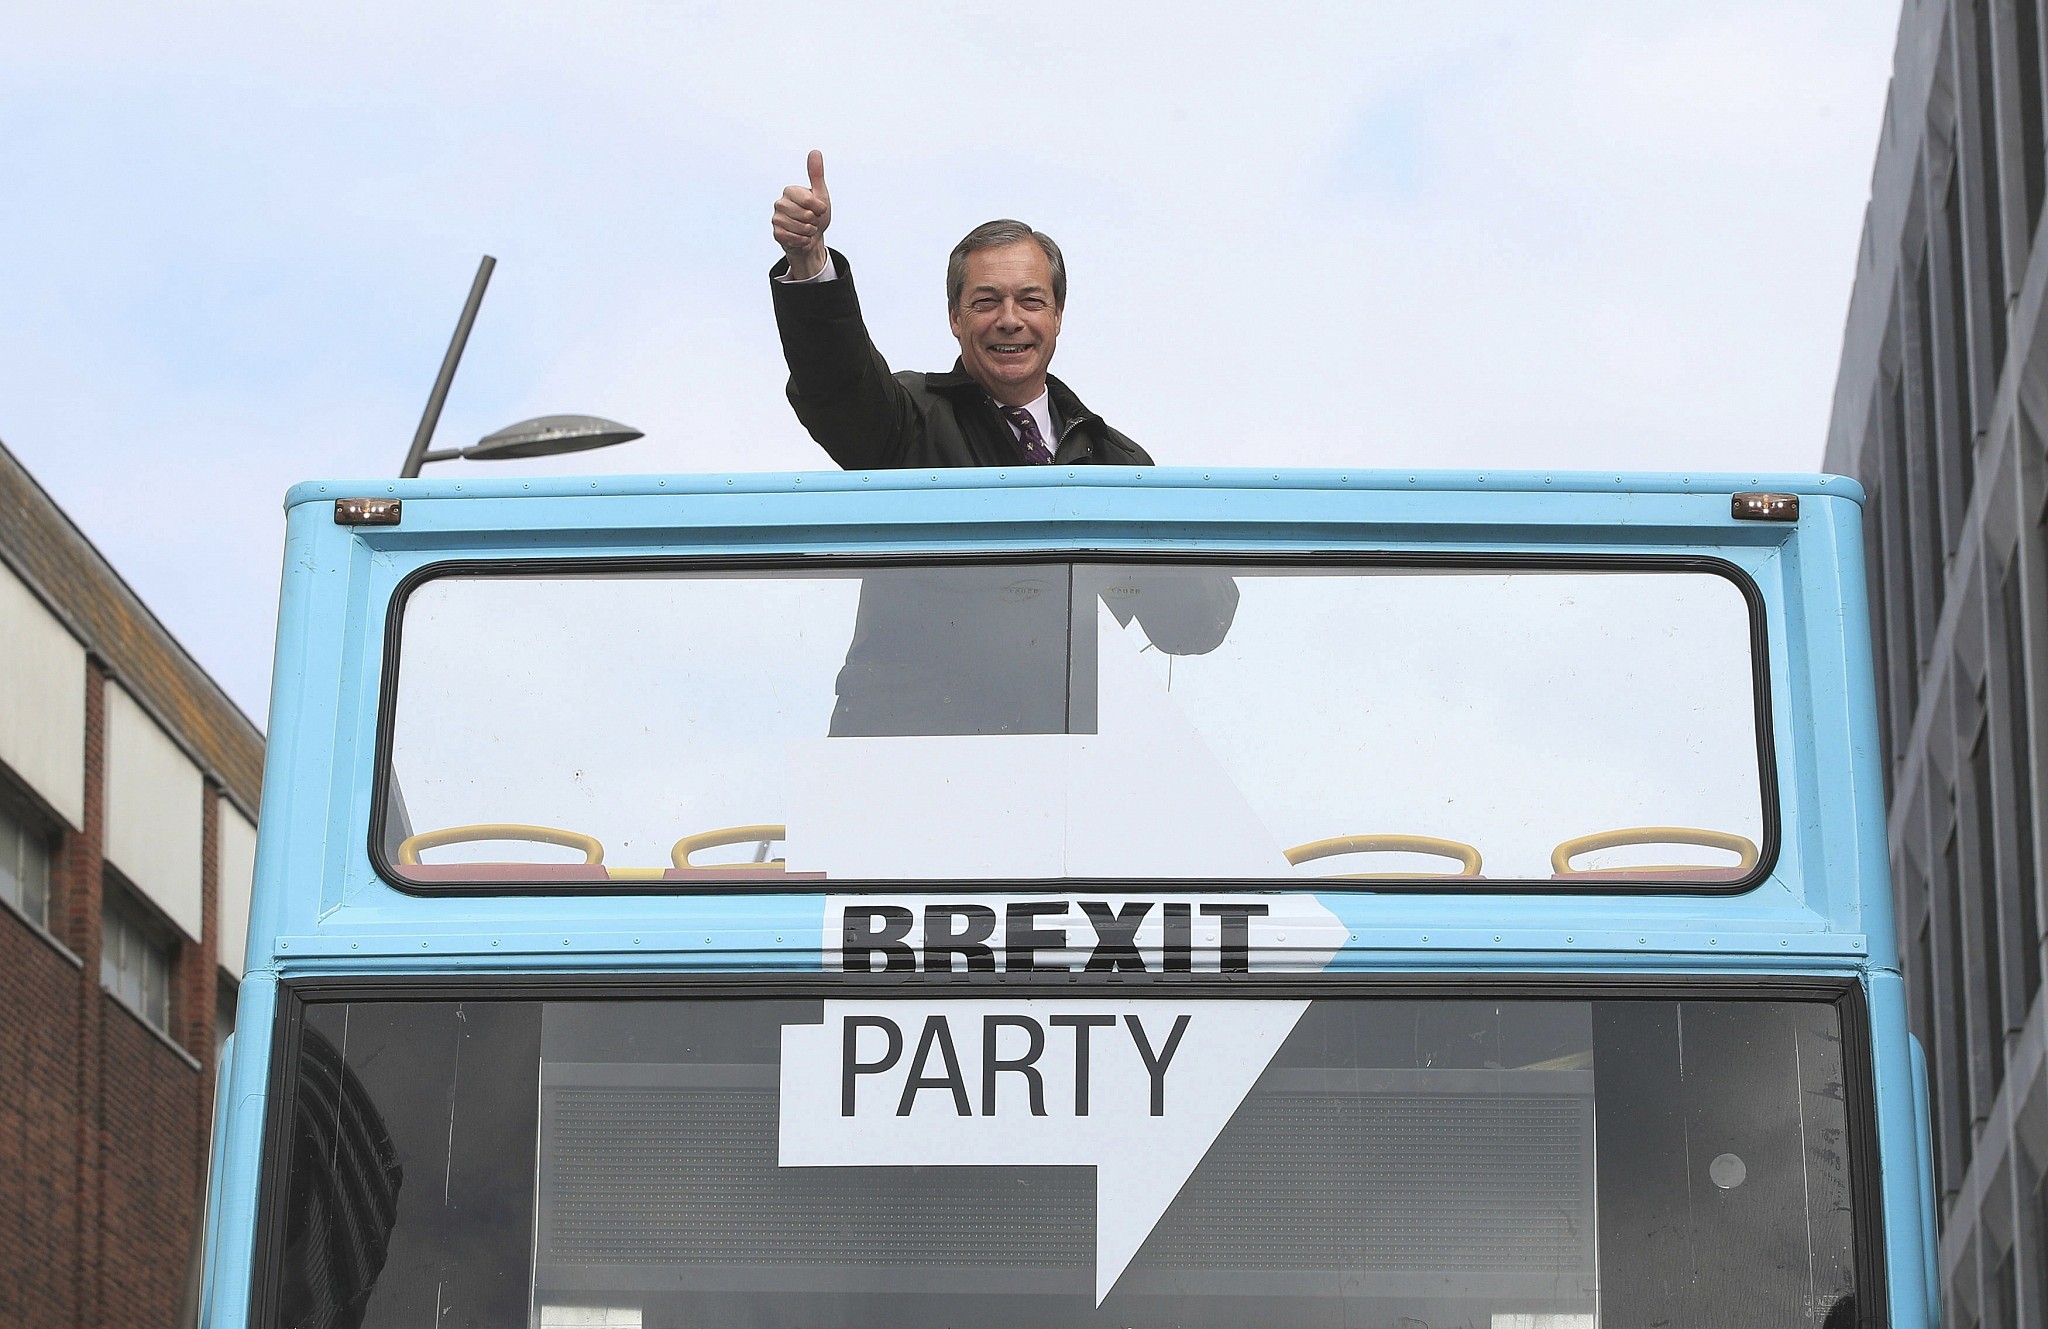 Brexit Party leader Nigel Farage gestures on an open topped bus while on the European Election campaign trail in Sunderland, England, Saturday, May 11, 2019. (Danny Lawson/PA via AP)